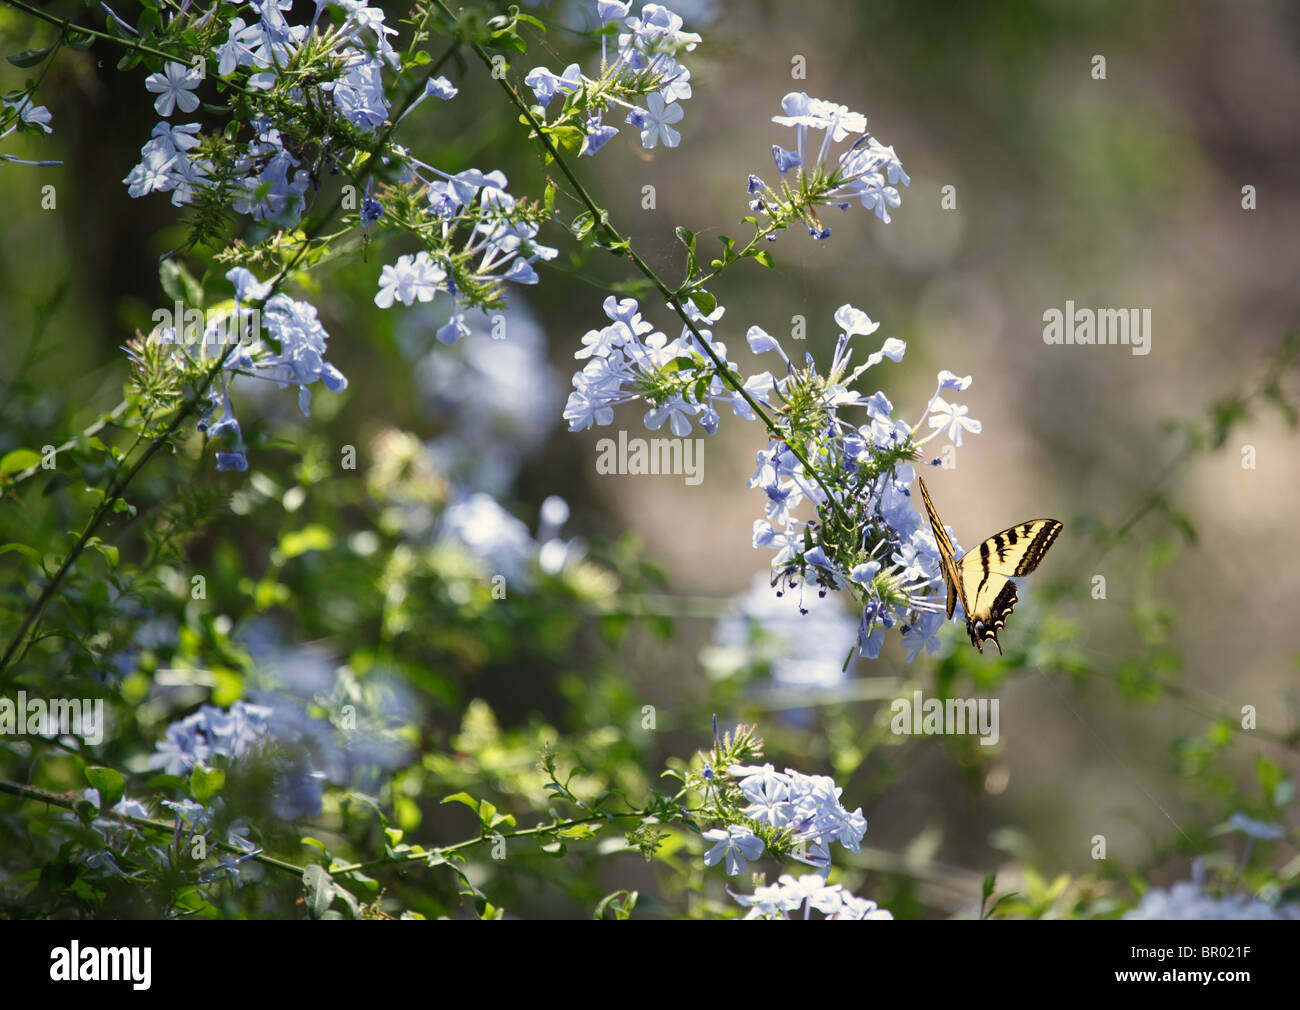 Western Tiger Swallowtail Butterfly perched in Phlox wildflowers Stock Photo